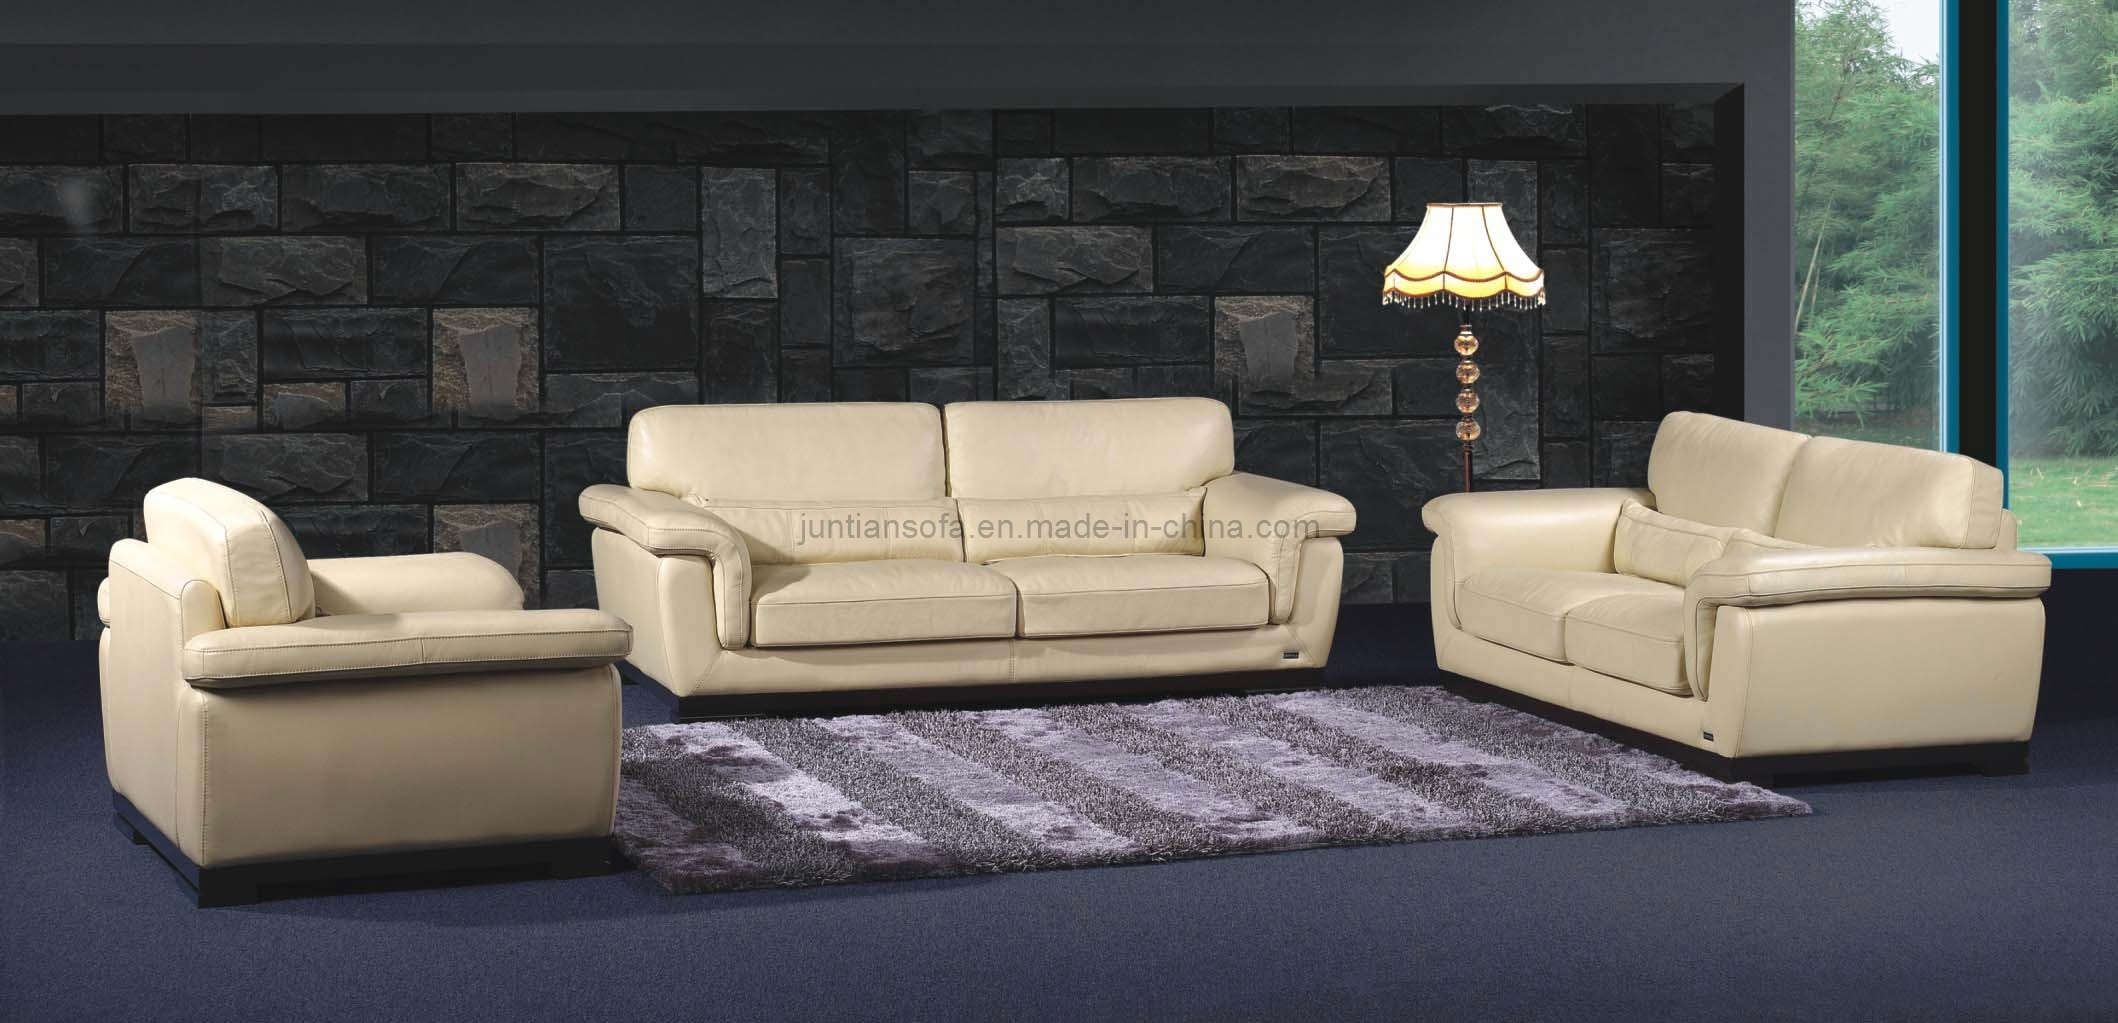 Lovely High Quality Sectional Sofa 30 For Sofa Room Ideas With High In Good Quality Sectional Sofas (Photo 1 of 10)